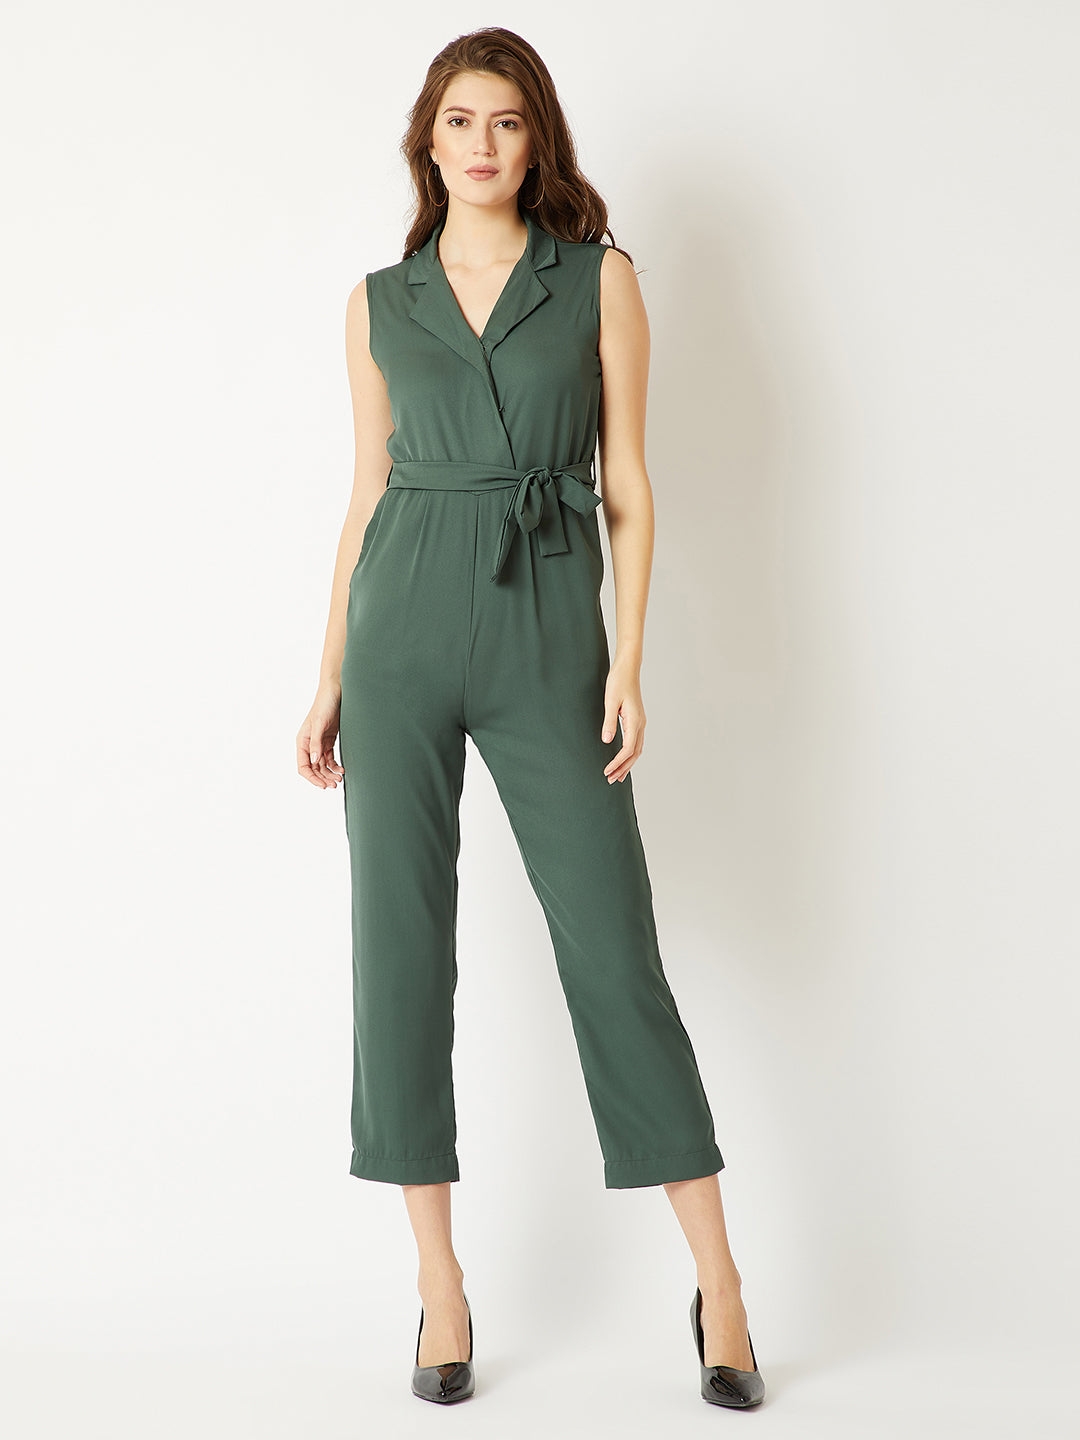 Dark Green V-Neck Sleeveless Straight Leg Tie-Up Solid Belted Wrap Jumpsuit